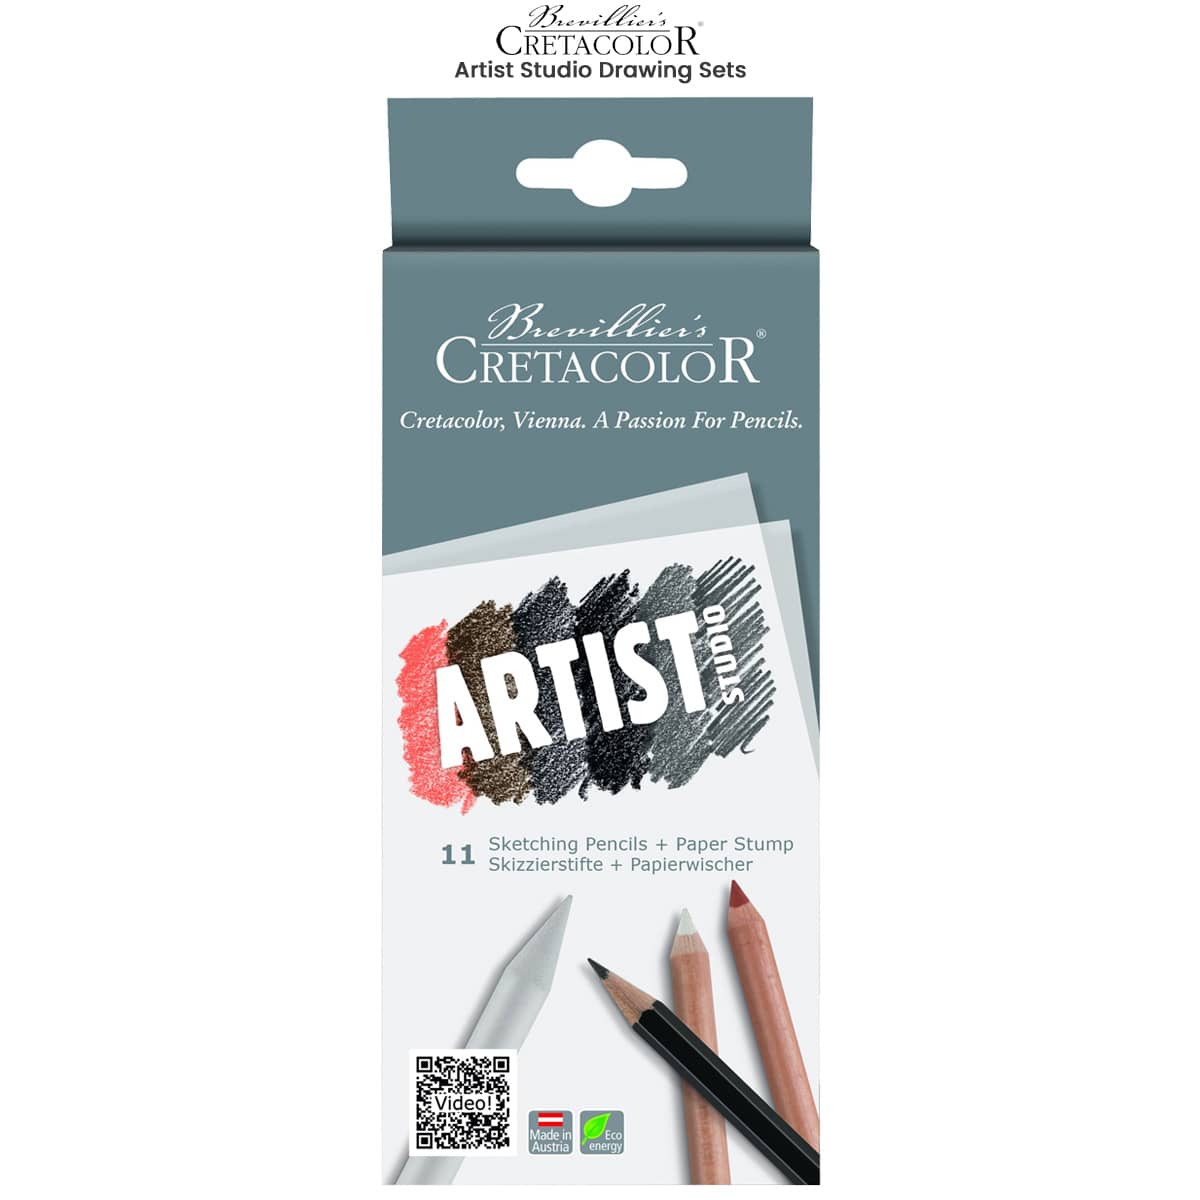 H & B Drawing Sketching Pencils Set, 35 Pack Art Kit with Sketch Book Draw Pencils Charcoal Pencil Eraser Sharpener Pencil Extender & Canvas